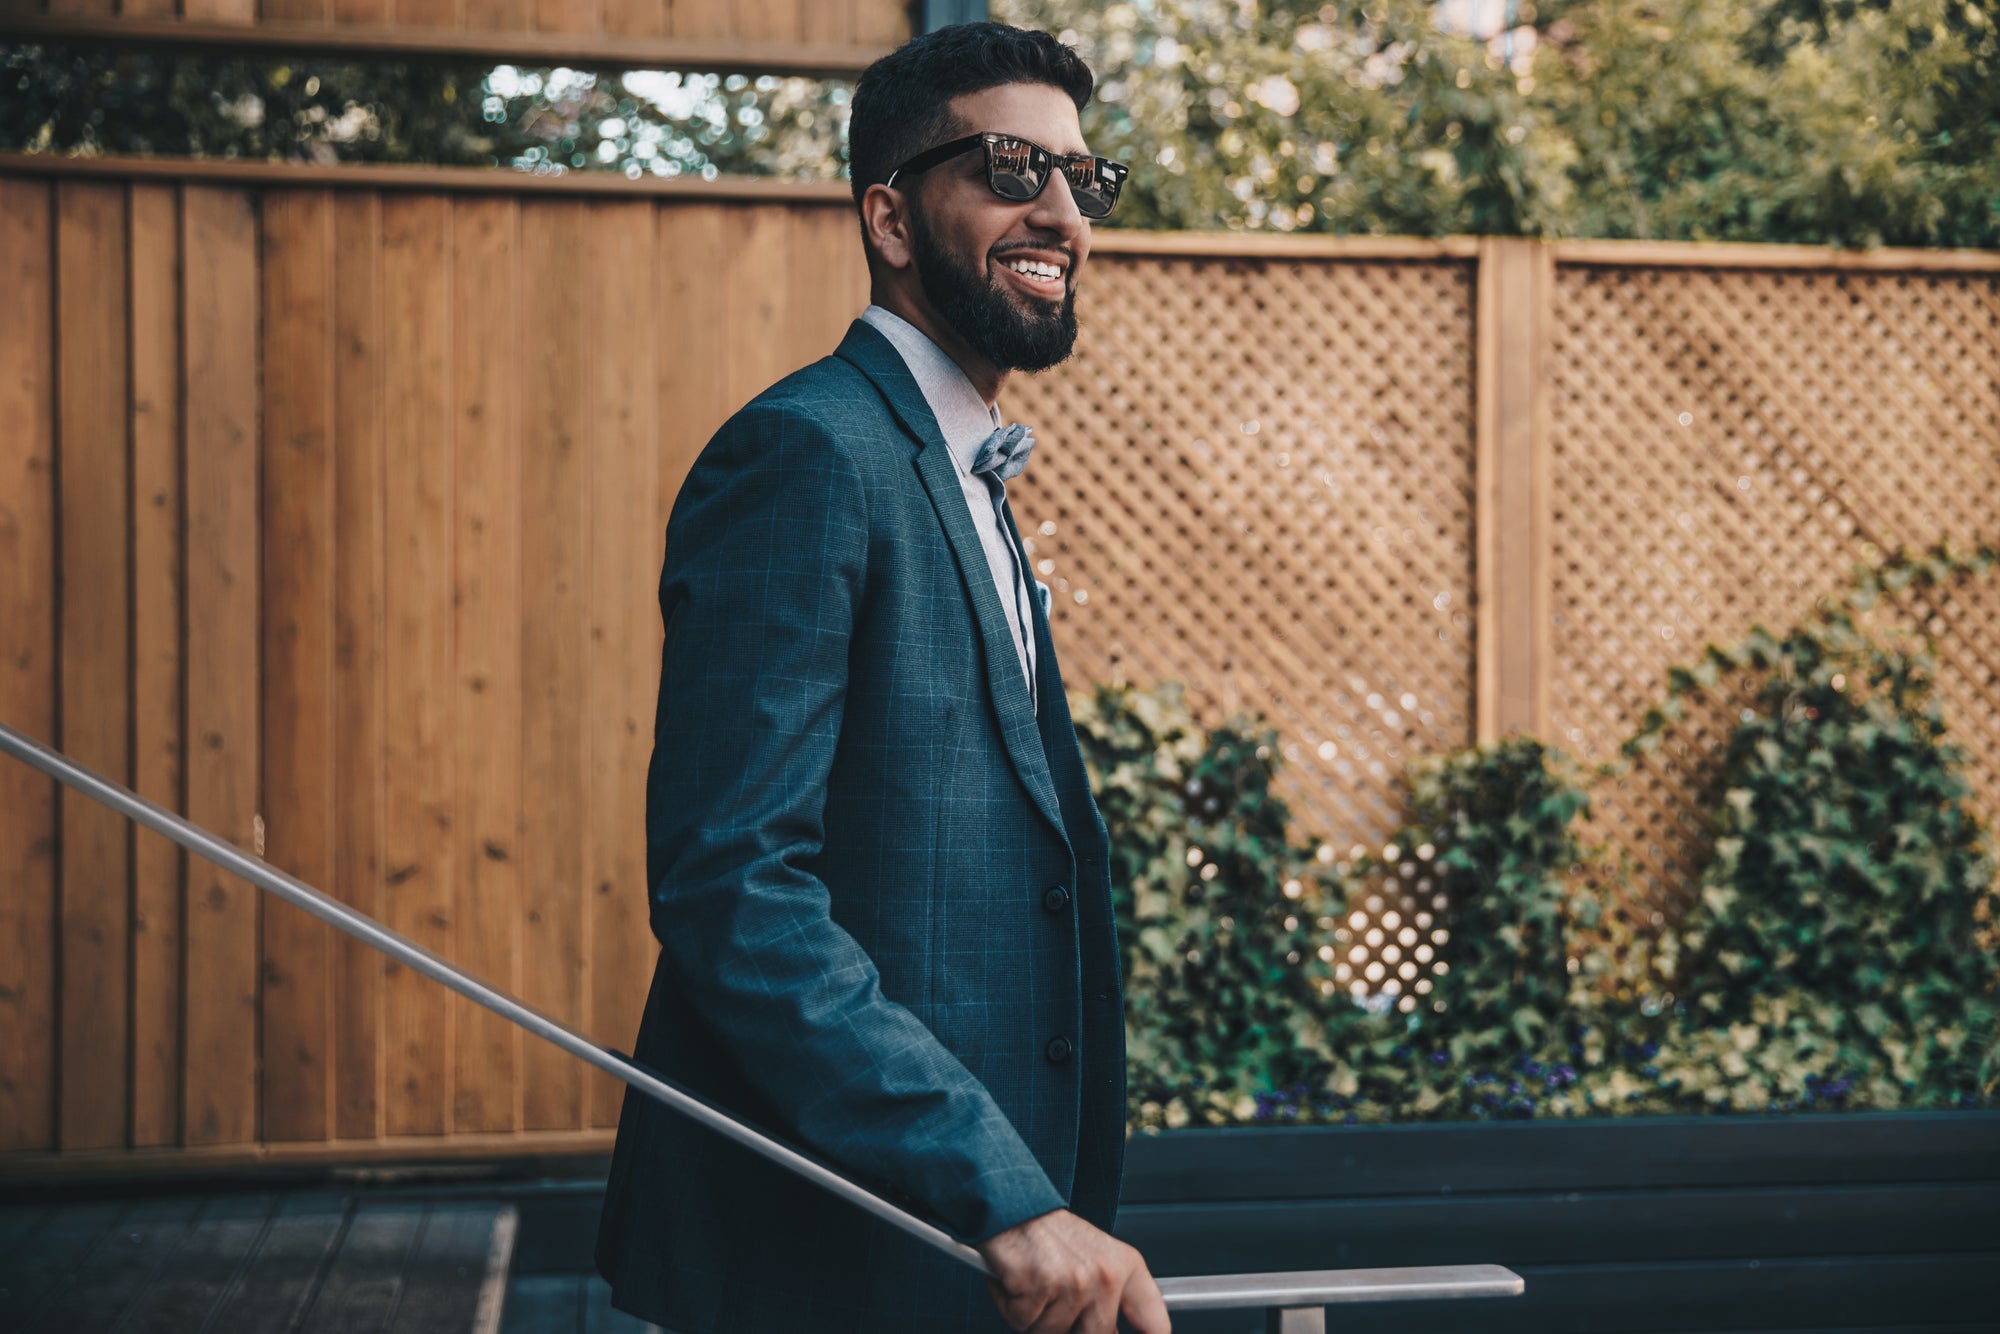 man in suit and sunglasses grinning while walking outside